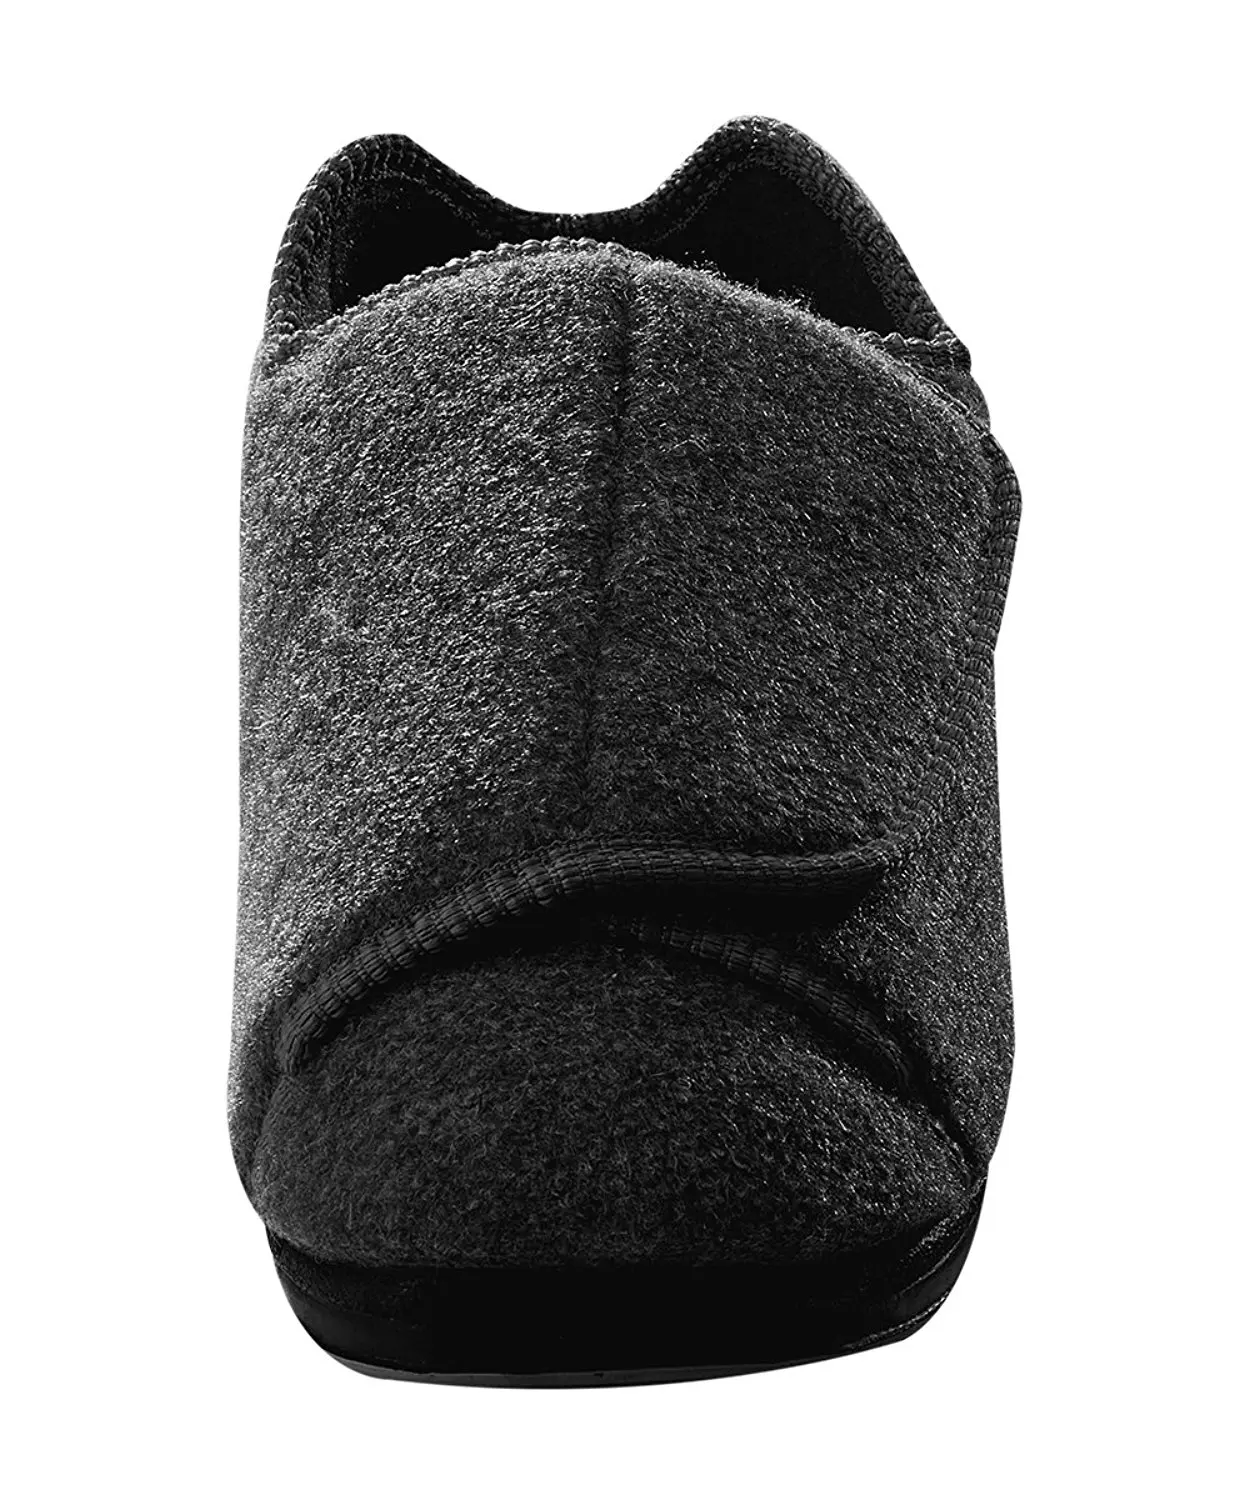 mens slippers extra wide fit